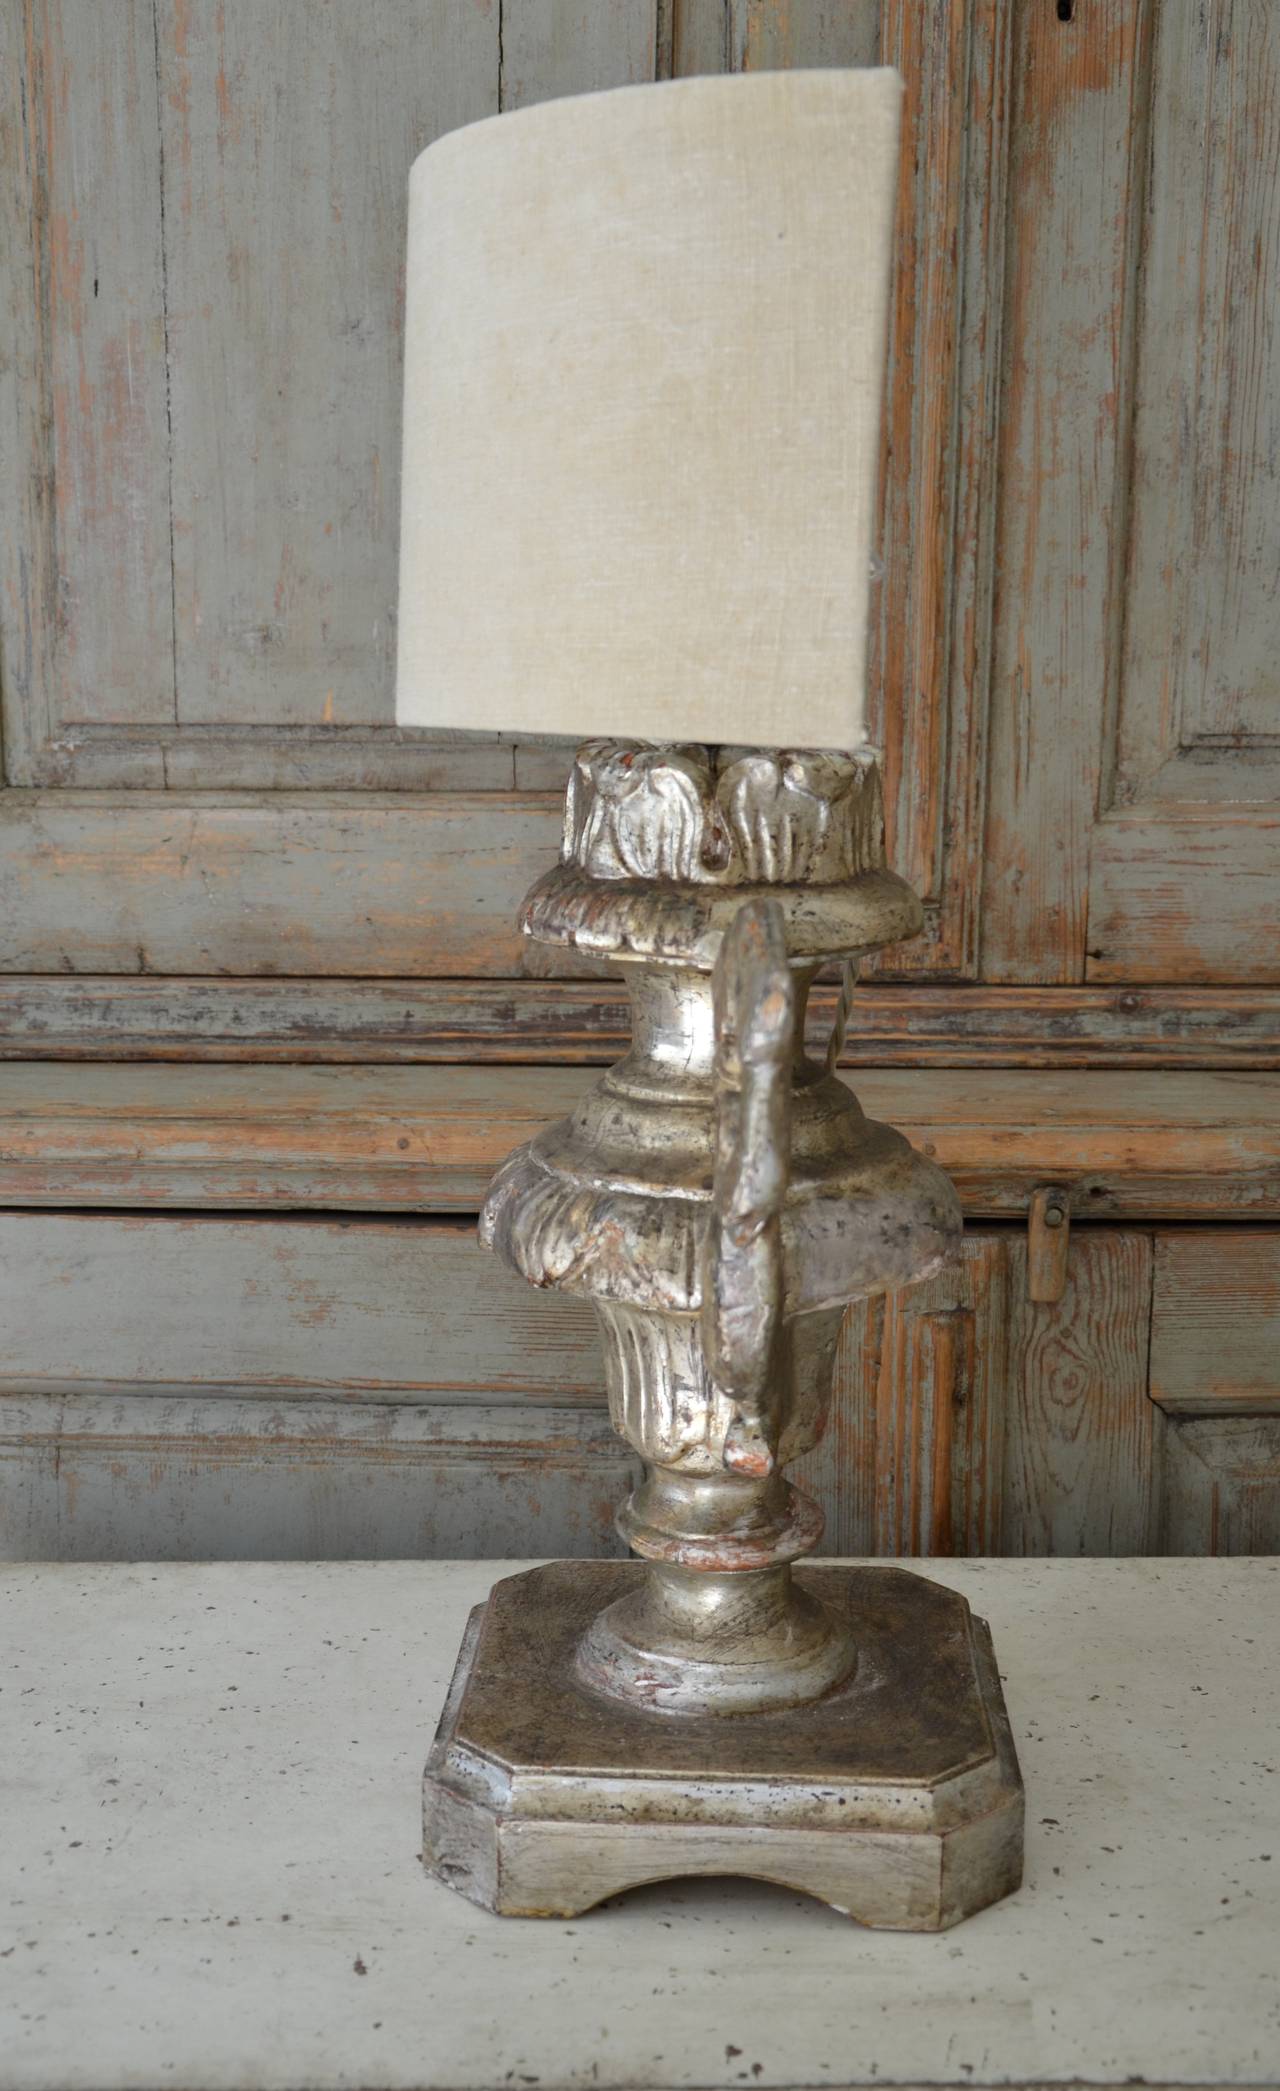 Pair of Italian 18th century candle holders in patinated silver giltwood with beautifully carved urn shape made as lamps with custom-made half shape linen shade. Classic and timeless for any decor.
Measures: Shade 14